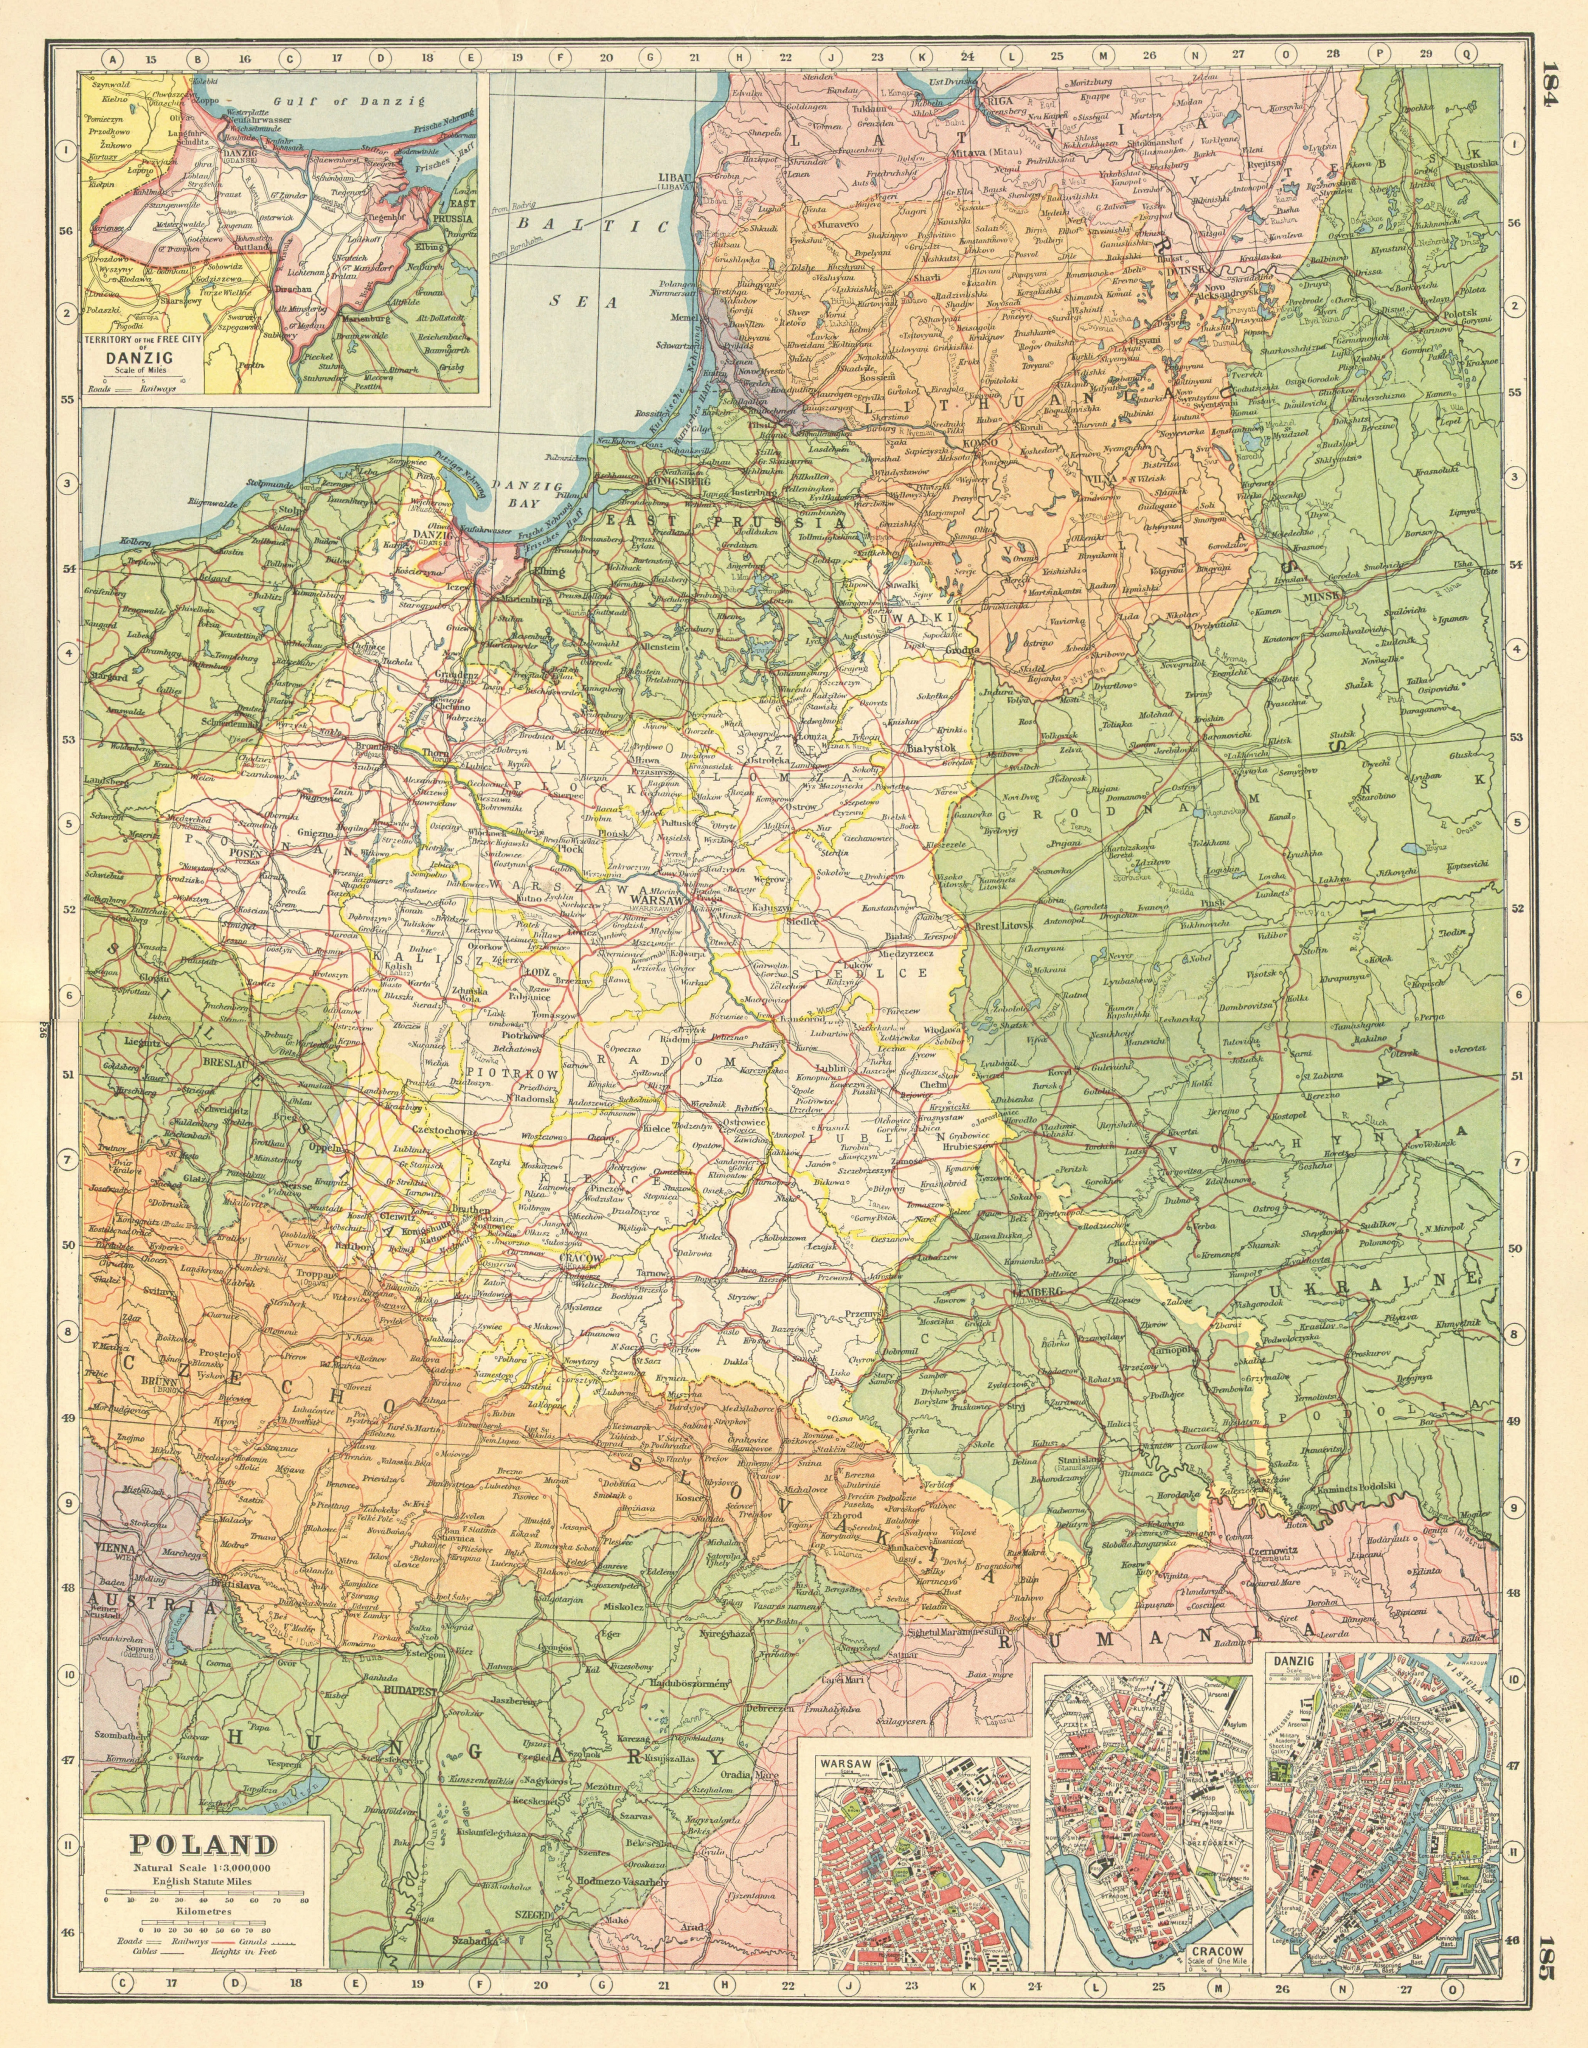 Associate Product POLAND. inset plans of Danzig Gdansk Warsaw Kraków Cracow.East Prussia 1920 map